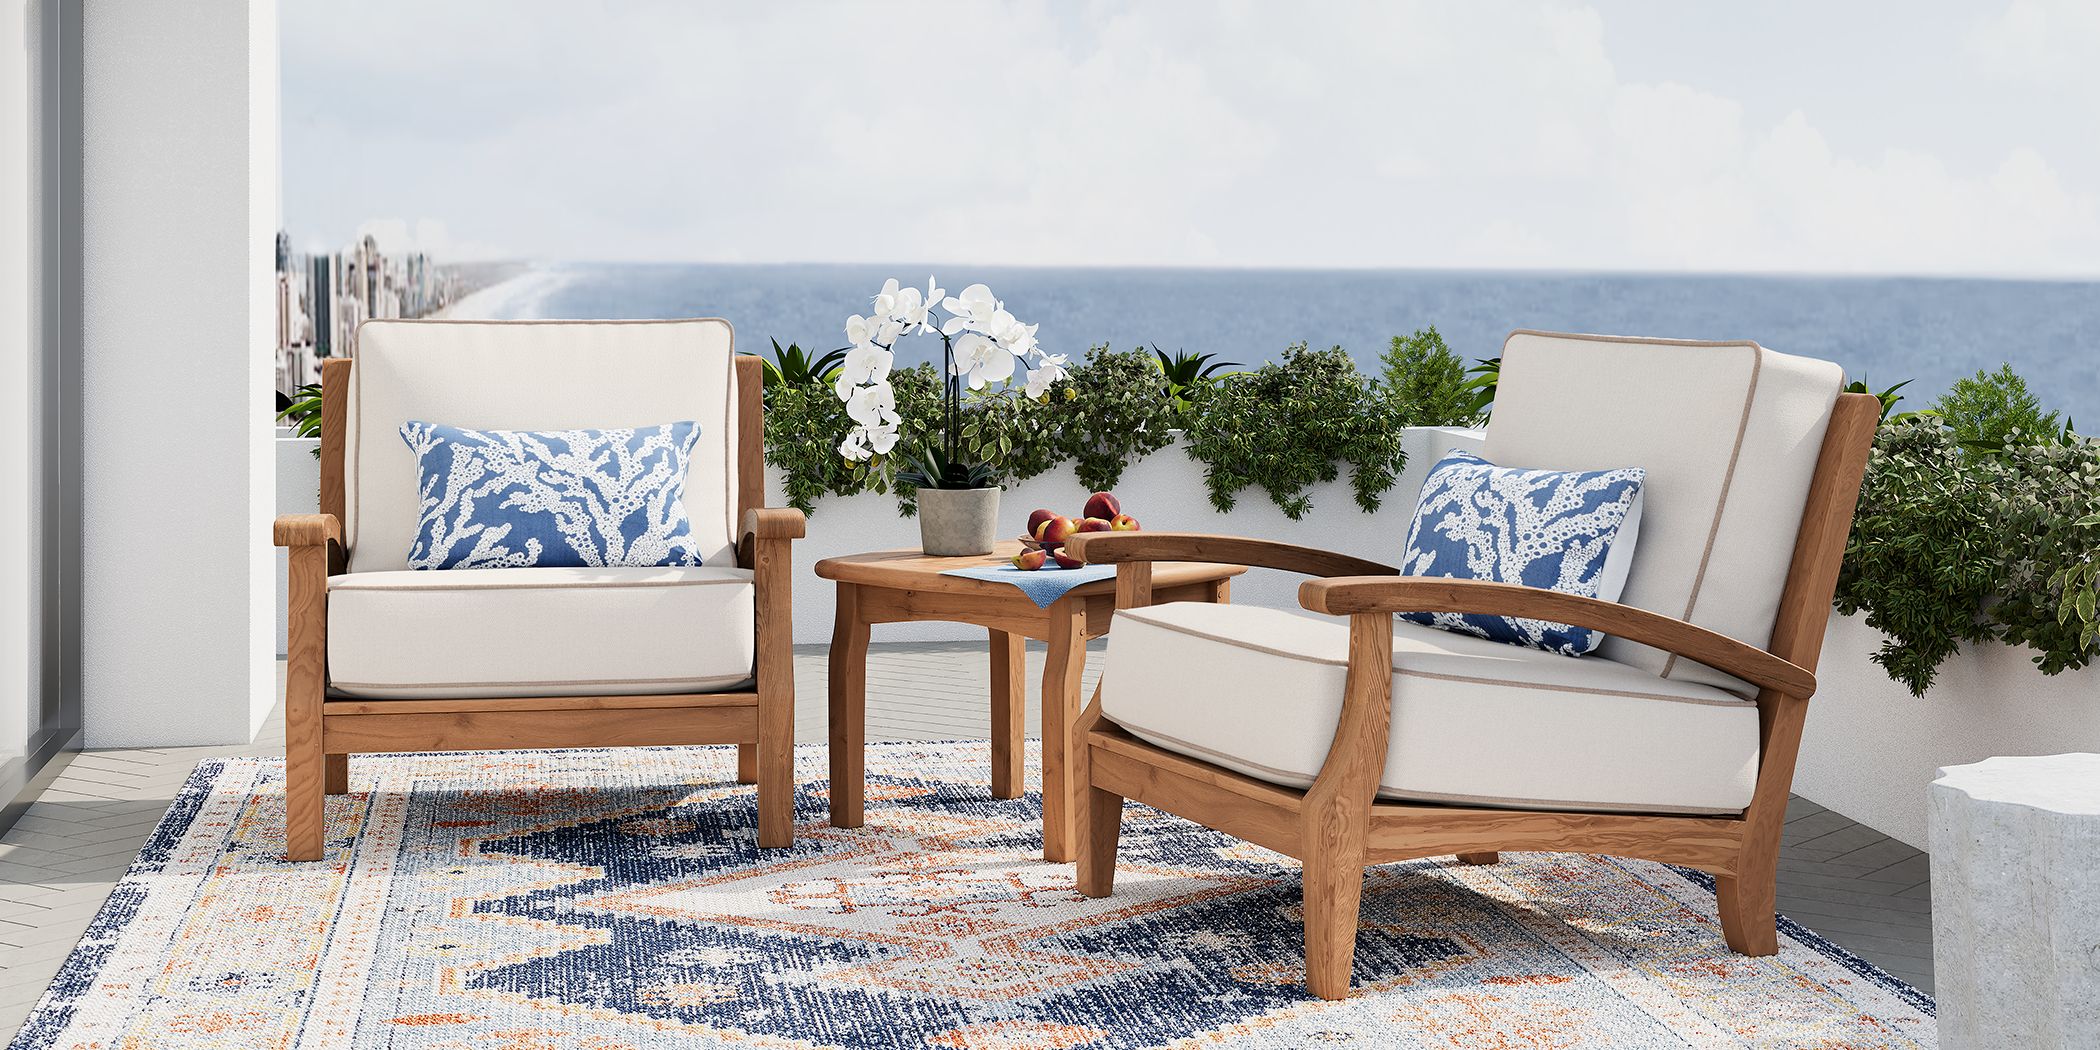 Pleasant Bay 3 Pc Teak Outdoor Seating Set with Vapor Cushions